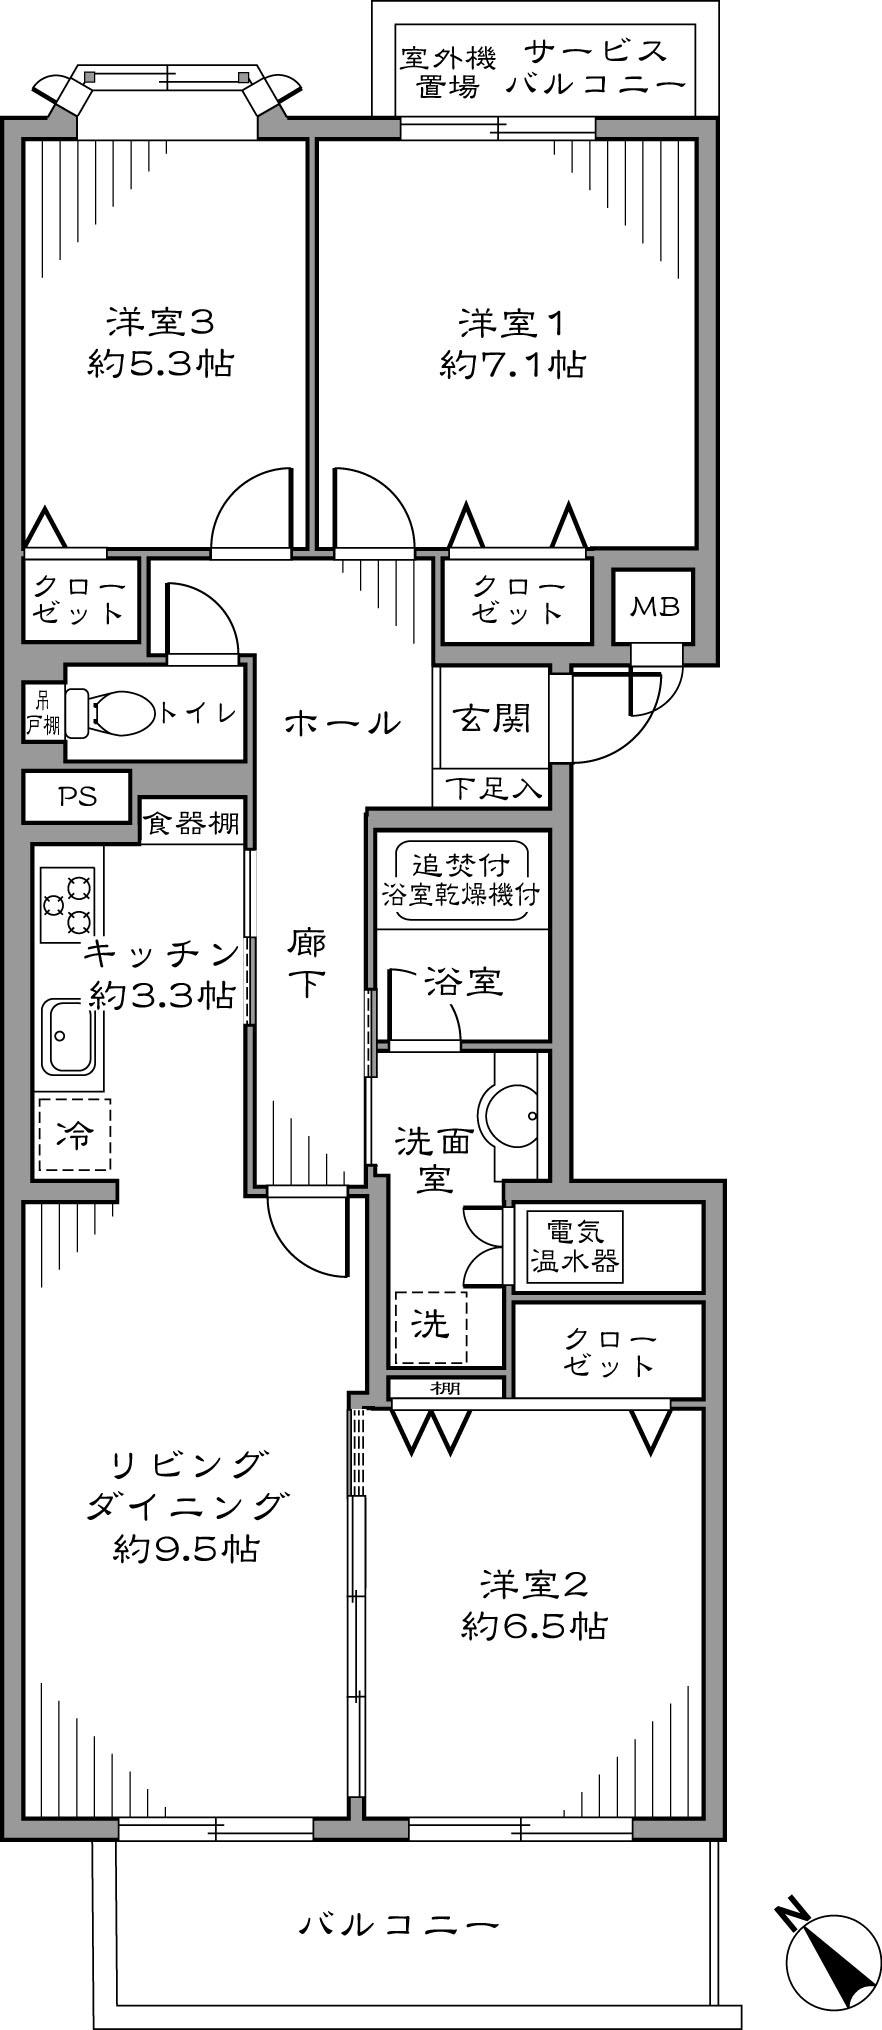 Floor plan. 3LDK, Price 31,800,000 yen, Footprint 74.9 sq m , I like the right side of the left in the private rooms are separated by a living room on the balcony area 6.06 sq m entrance